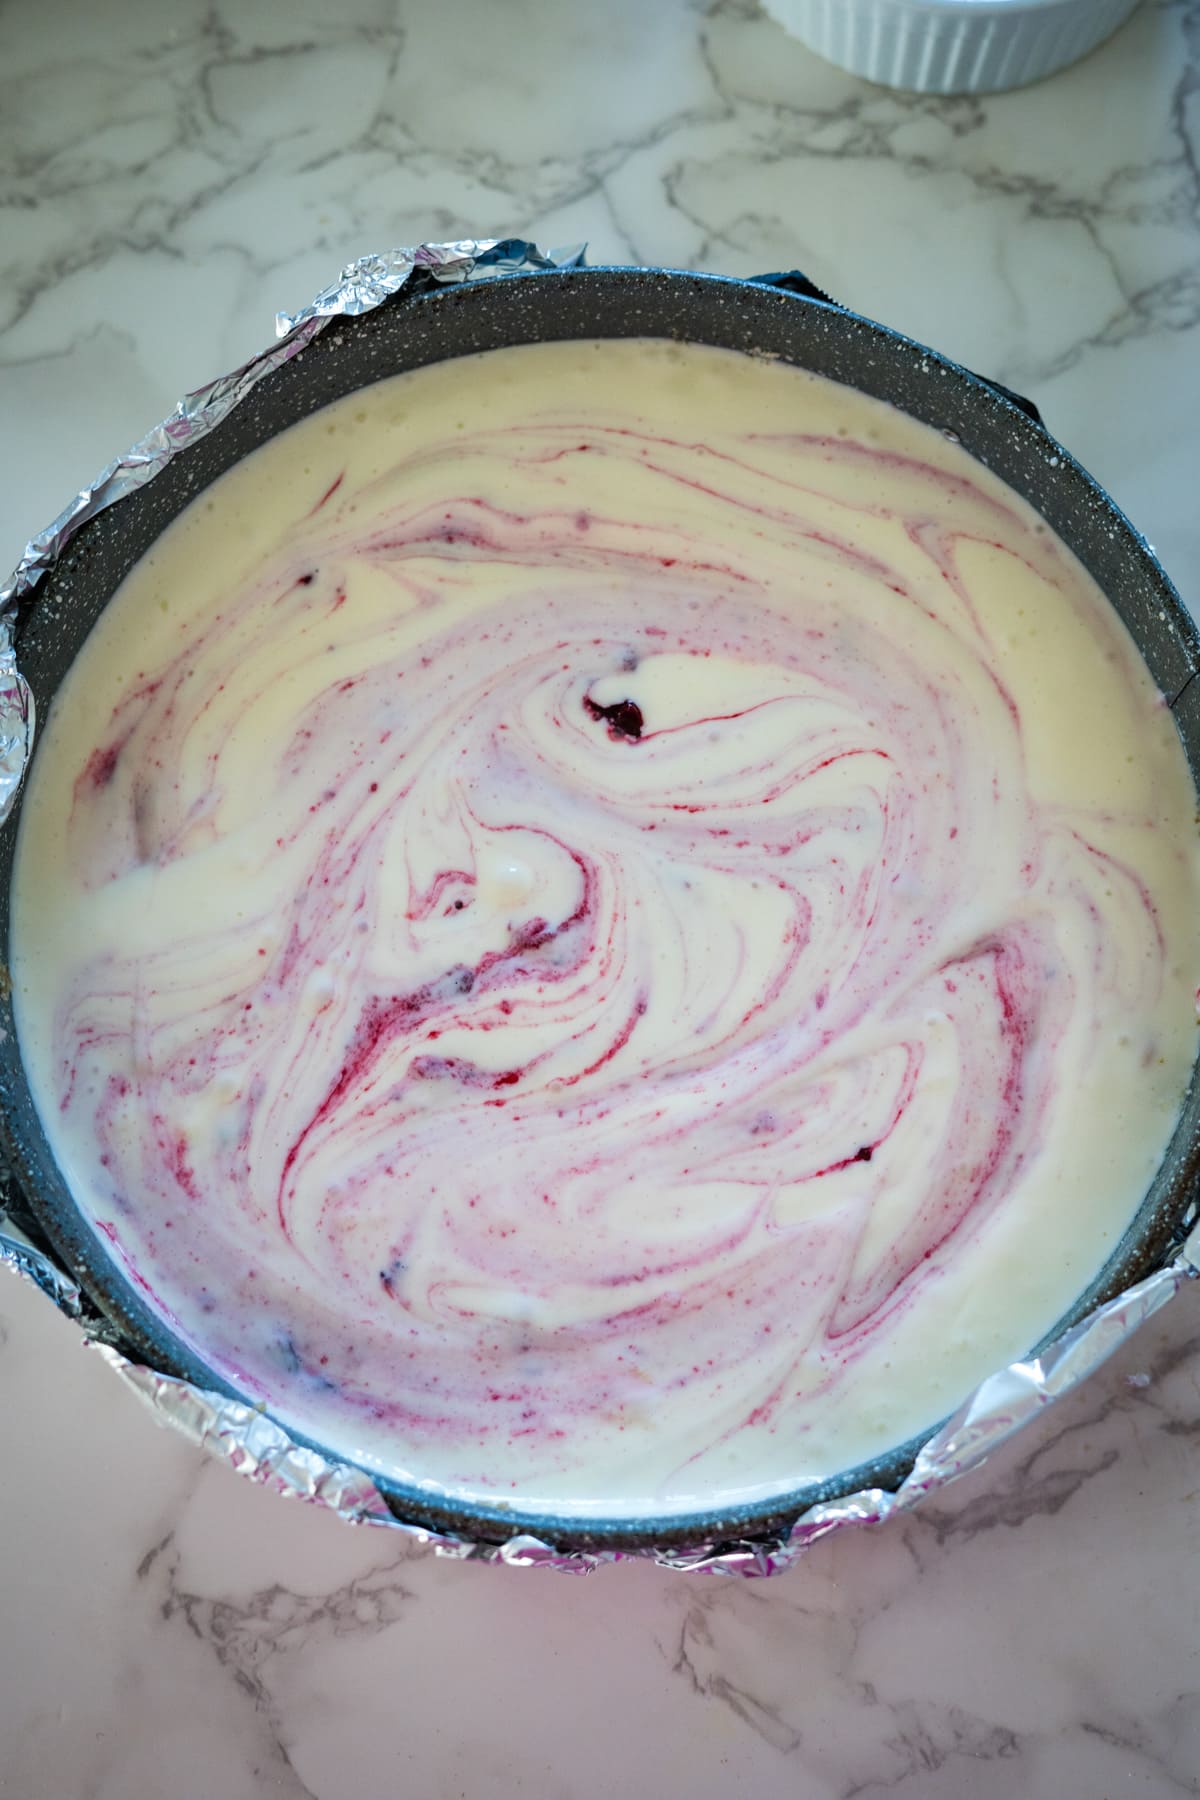 A cranberry cheesecake in a pan on a marble counter.